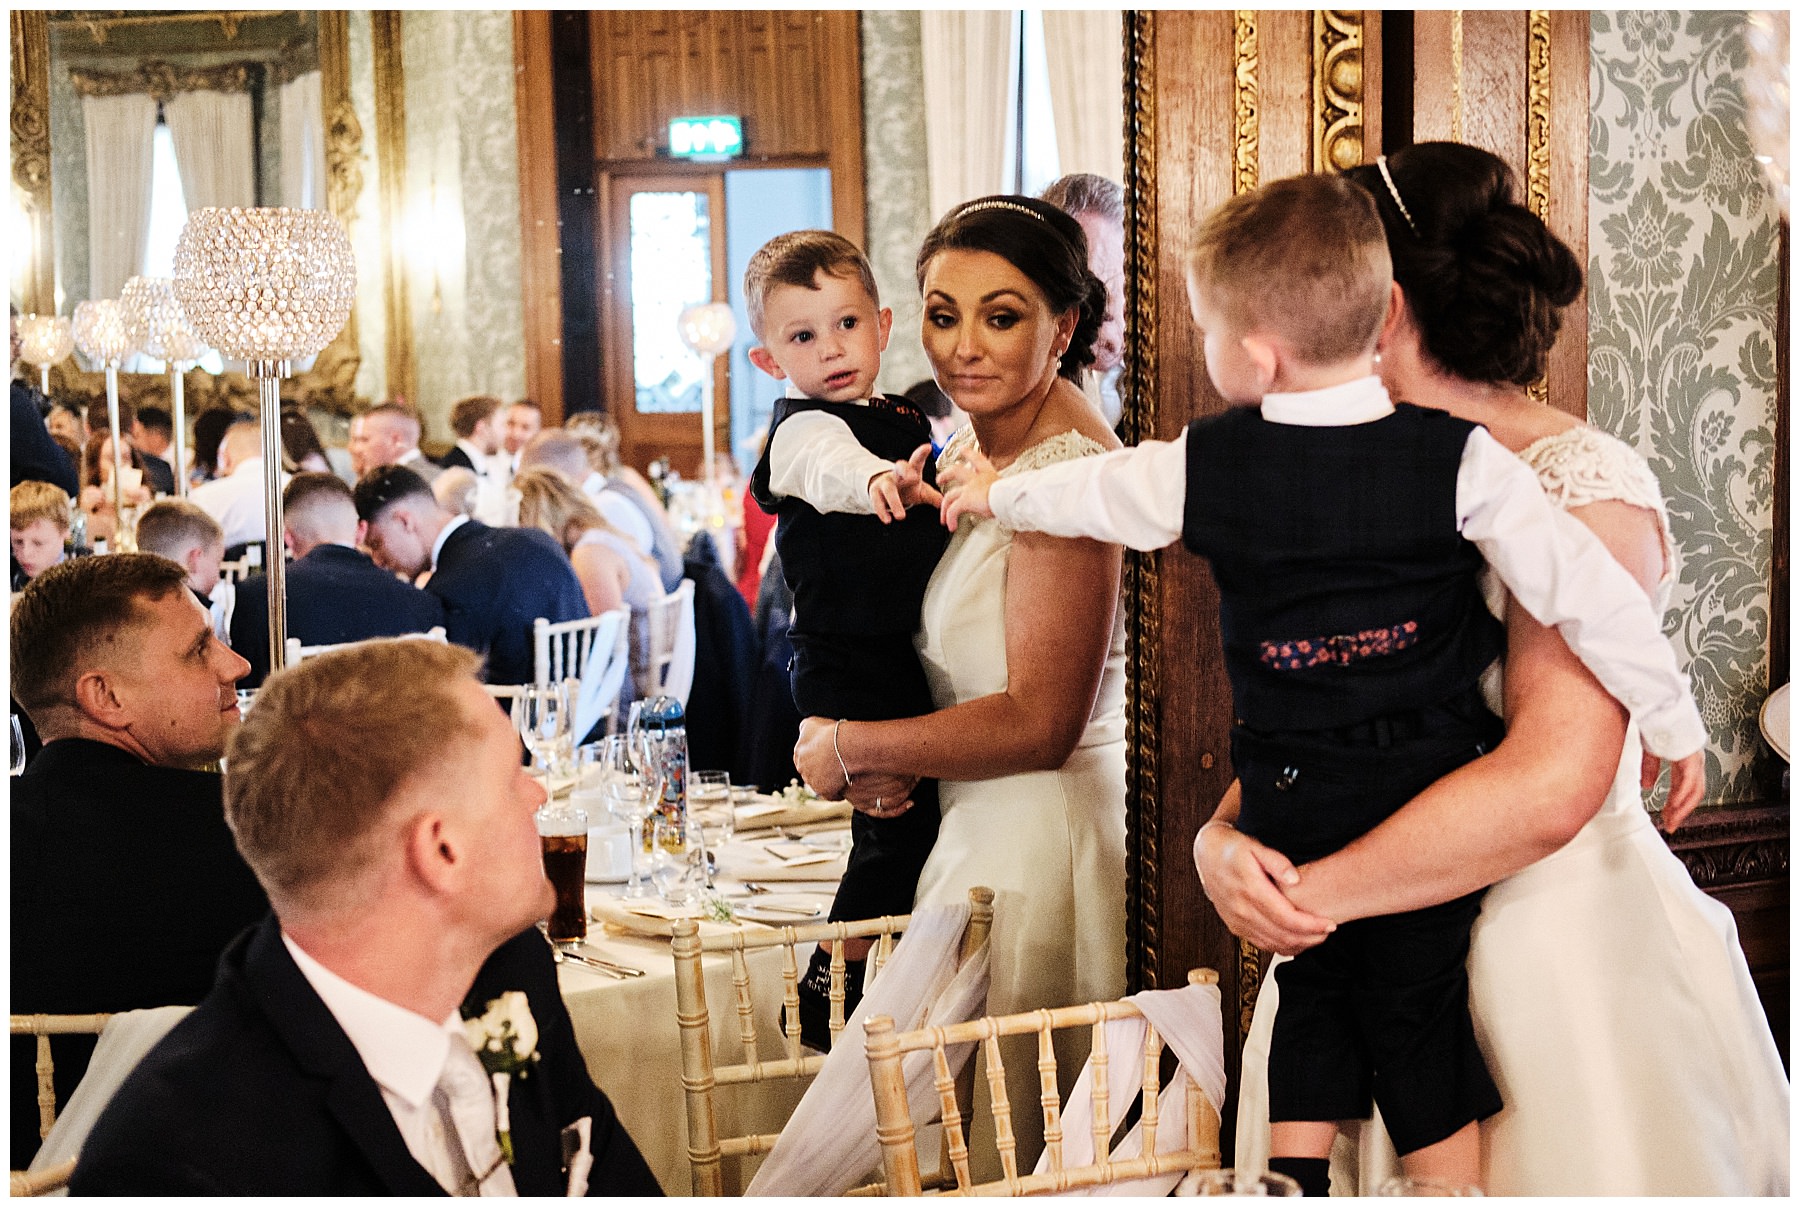 Natural candid photos capturing the guests relaxing and having fun during the wedding breakfast at Hawkstone Hall in Shrewsbury by Documentary Wedding Photographer Stuart James